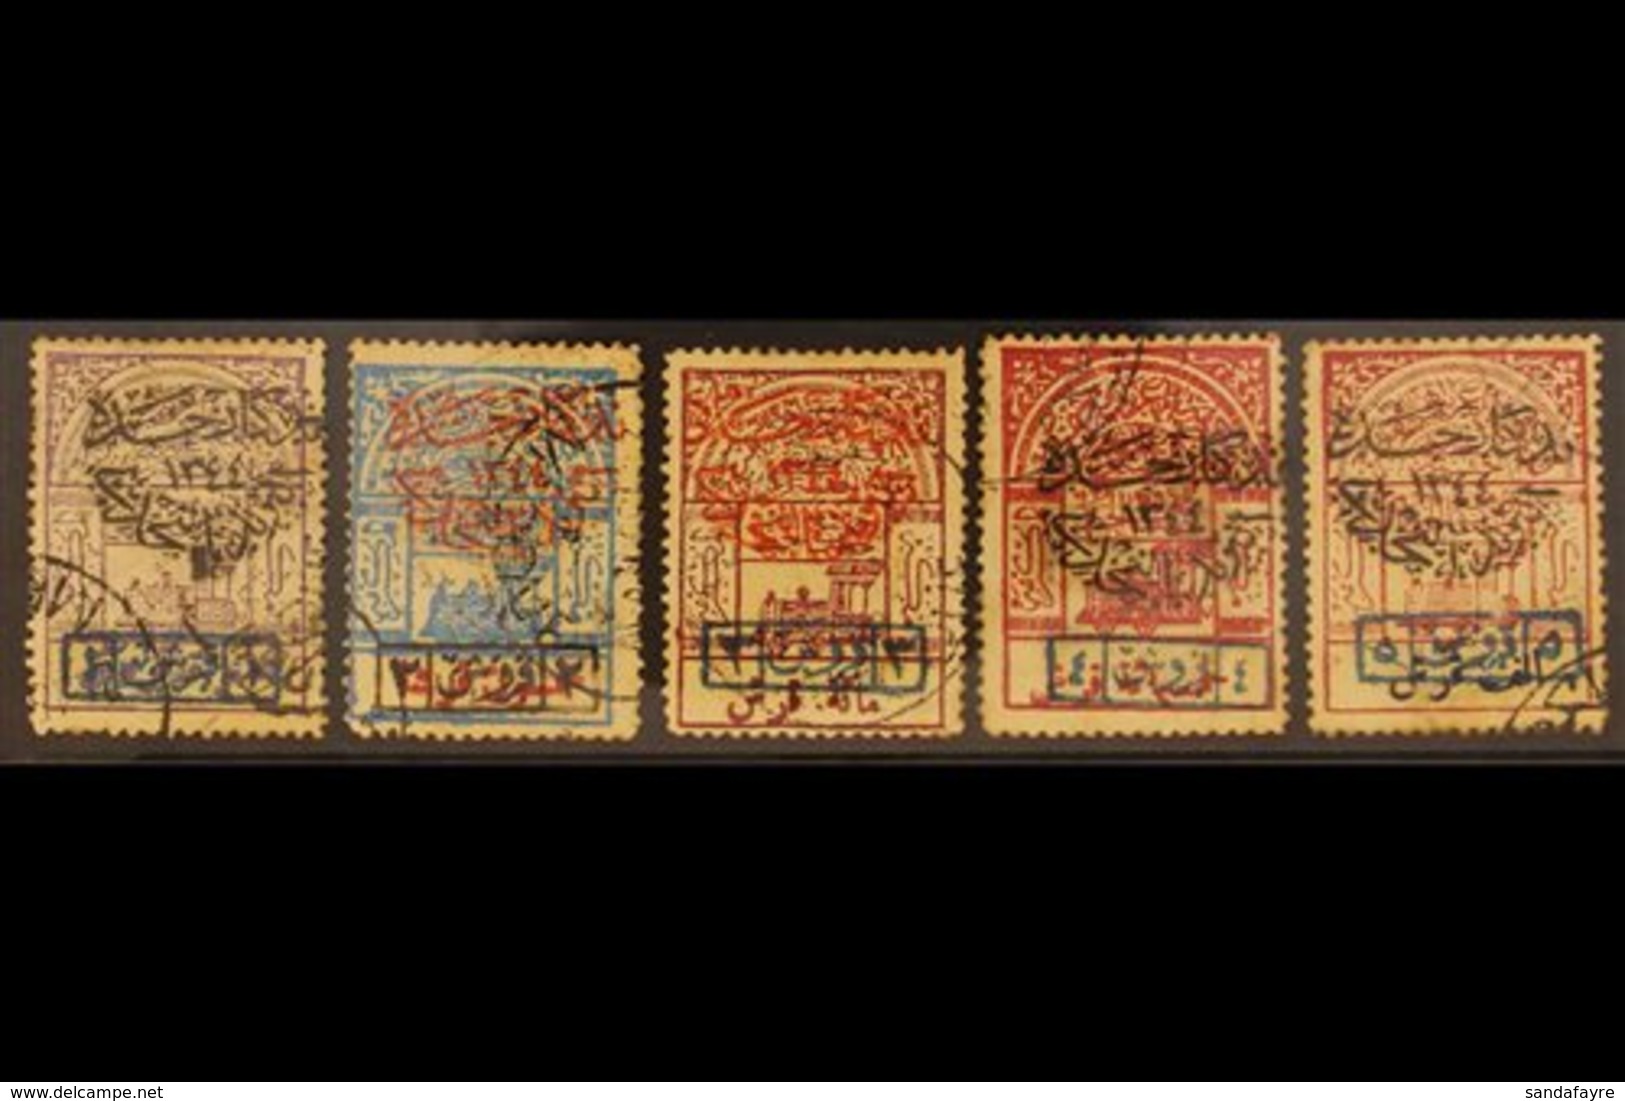 1925 (23 DEC) Capture Of Jeddah Complete Handstamped Set On Railway Tax Stamps, SG 249/253, Cto Used With Gum Toning, 2p - Saudi Arabia